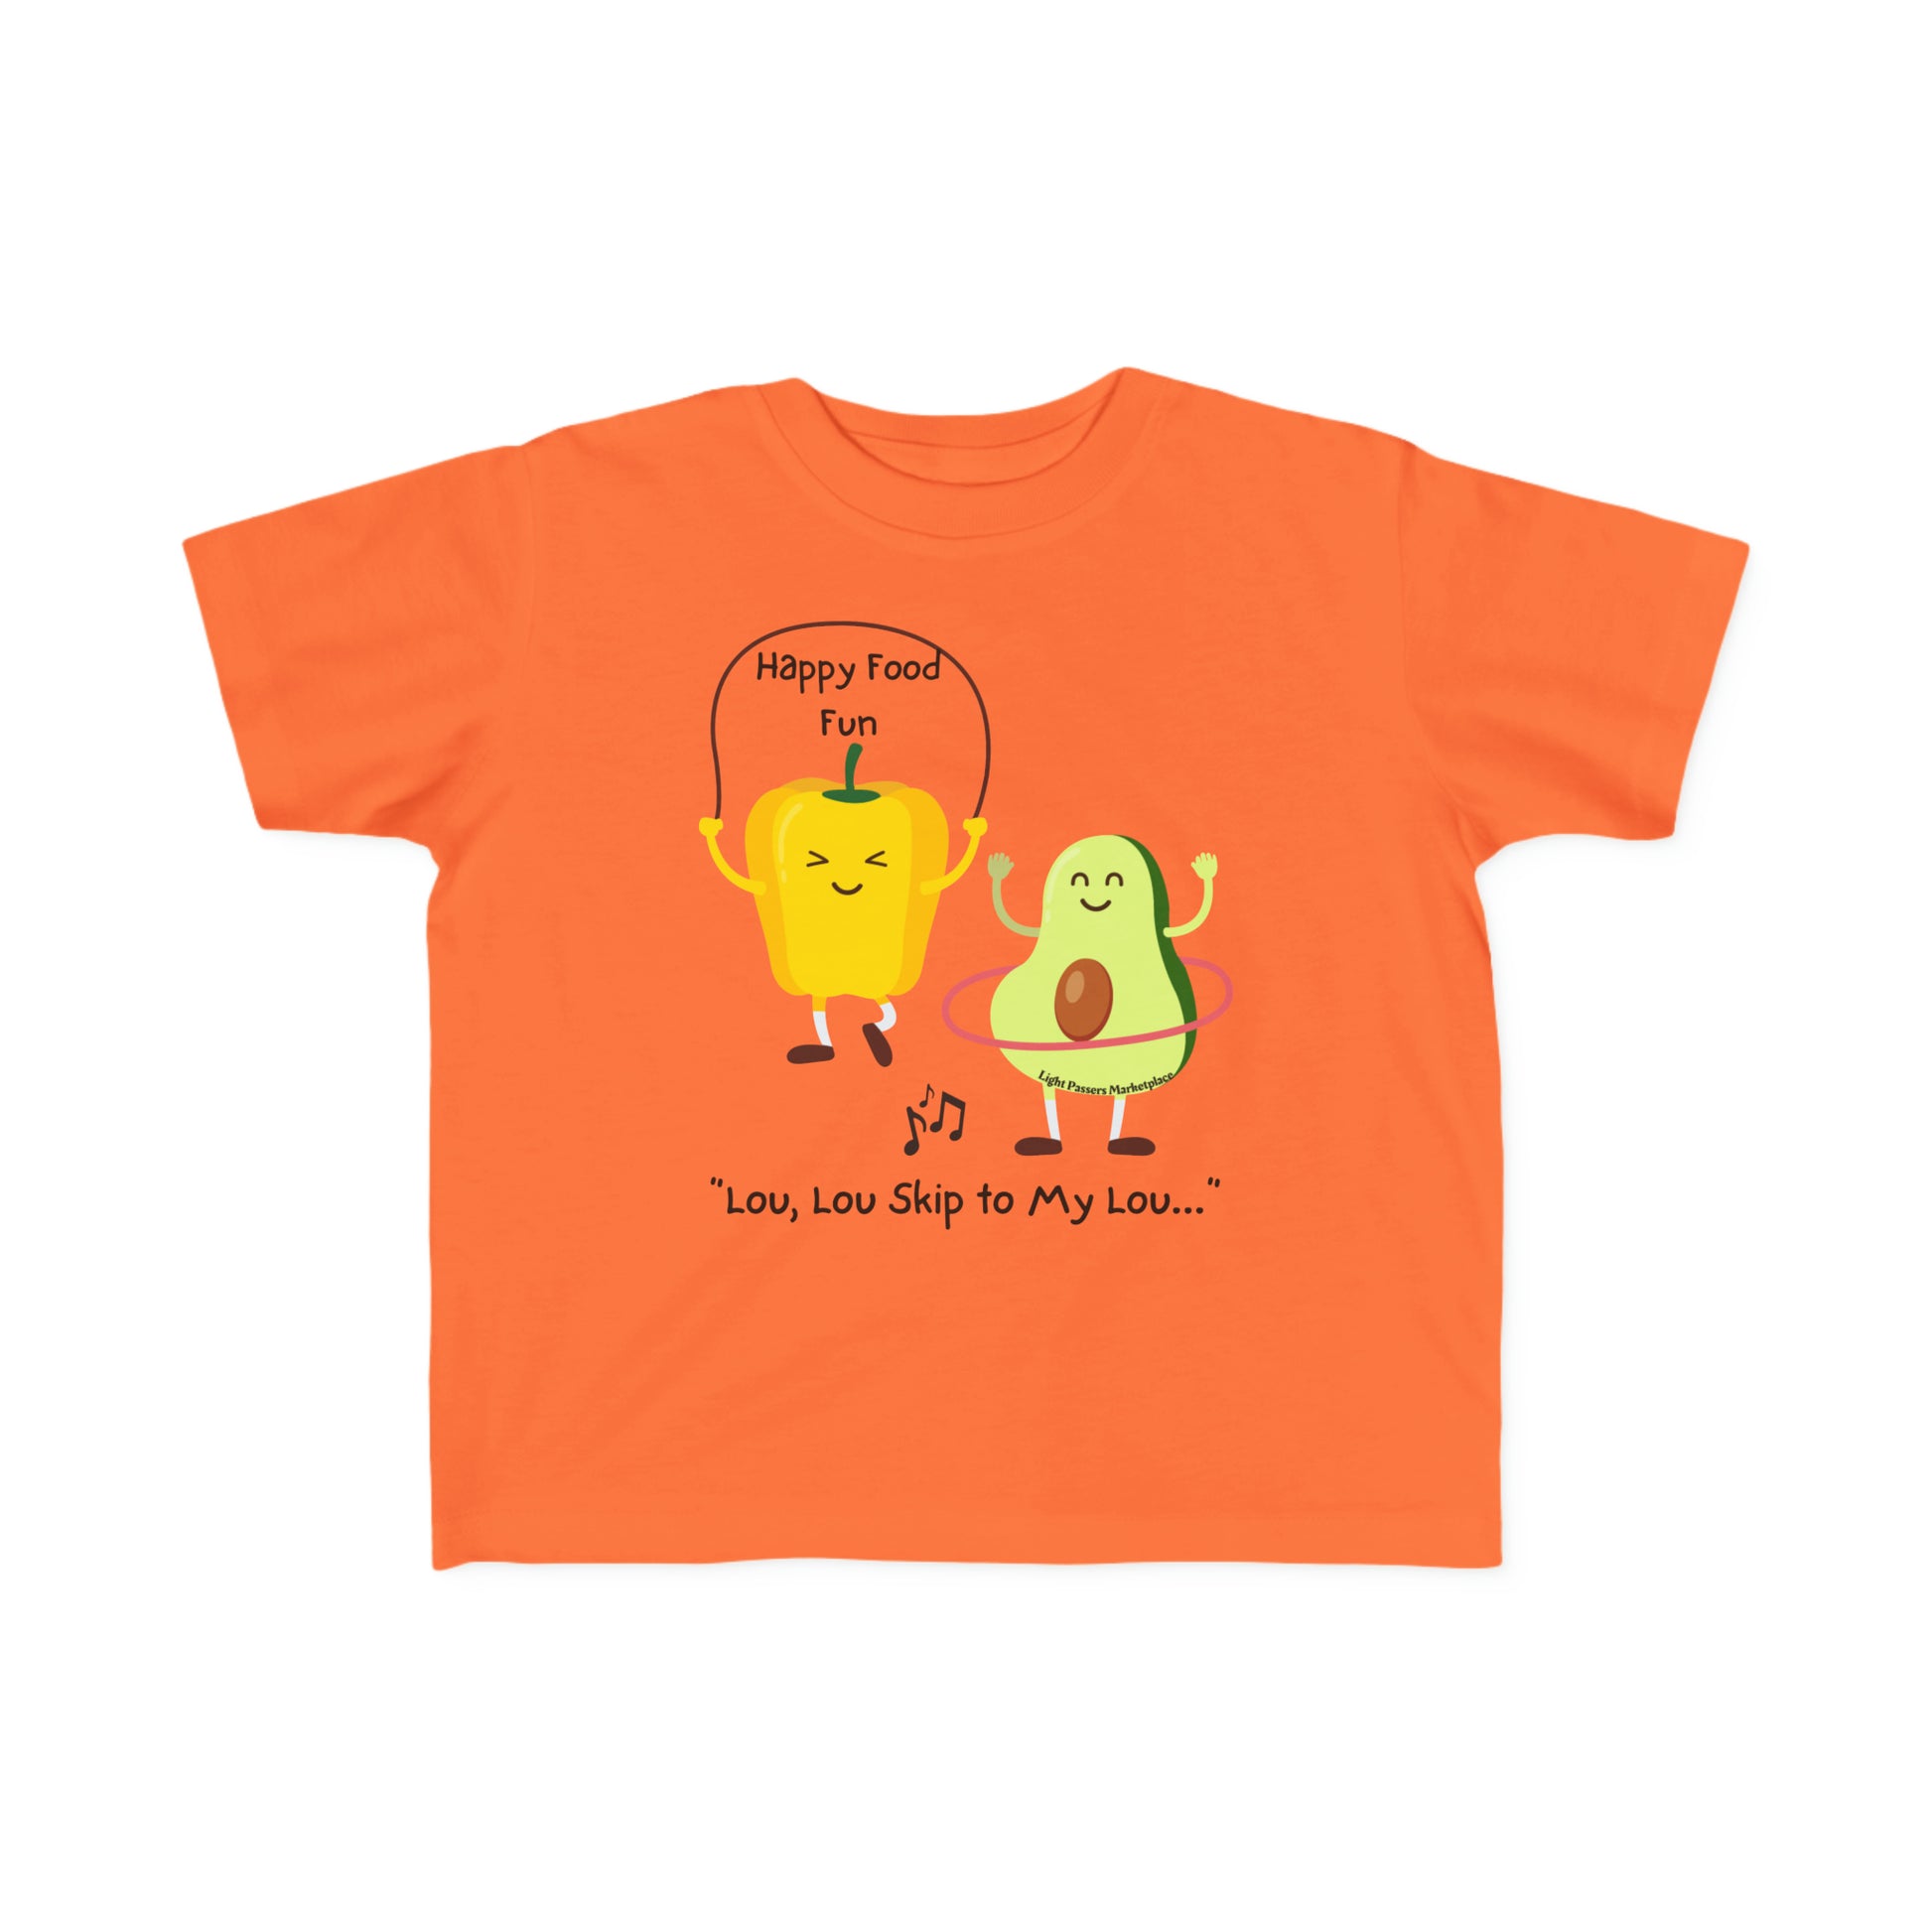 A Skip To My Lou Toddler T-shirt featuring cartoon characters like a pepper and avocado jumping rope, perfect for sensitive skin, made of 100% combed cotton, 4.5 oz/yd² light fabric, tear-away label, classic fit.